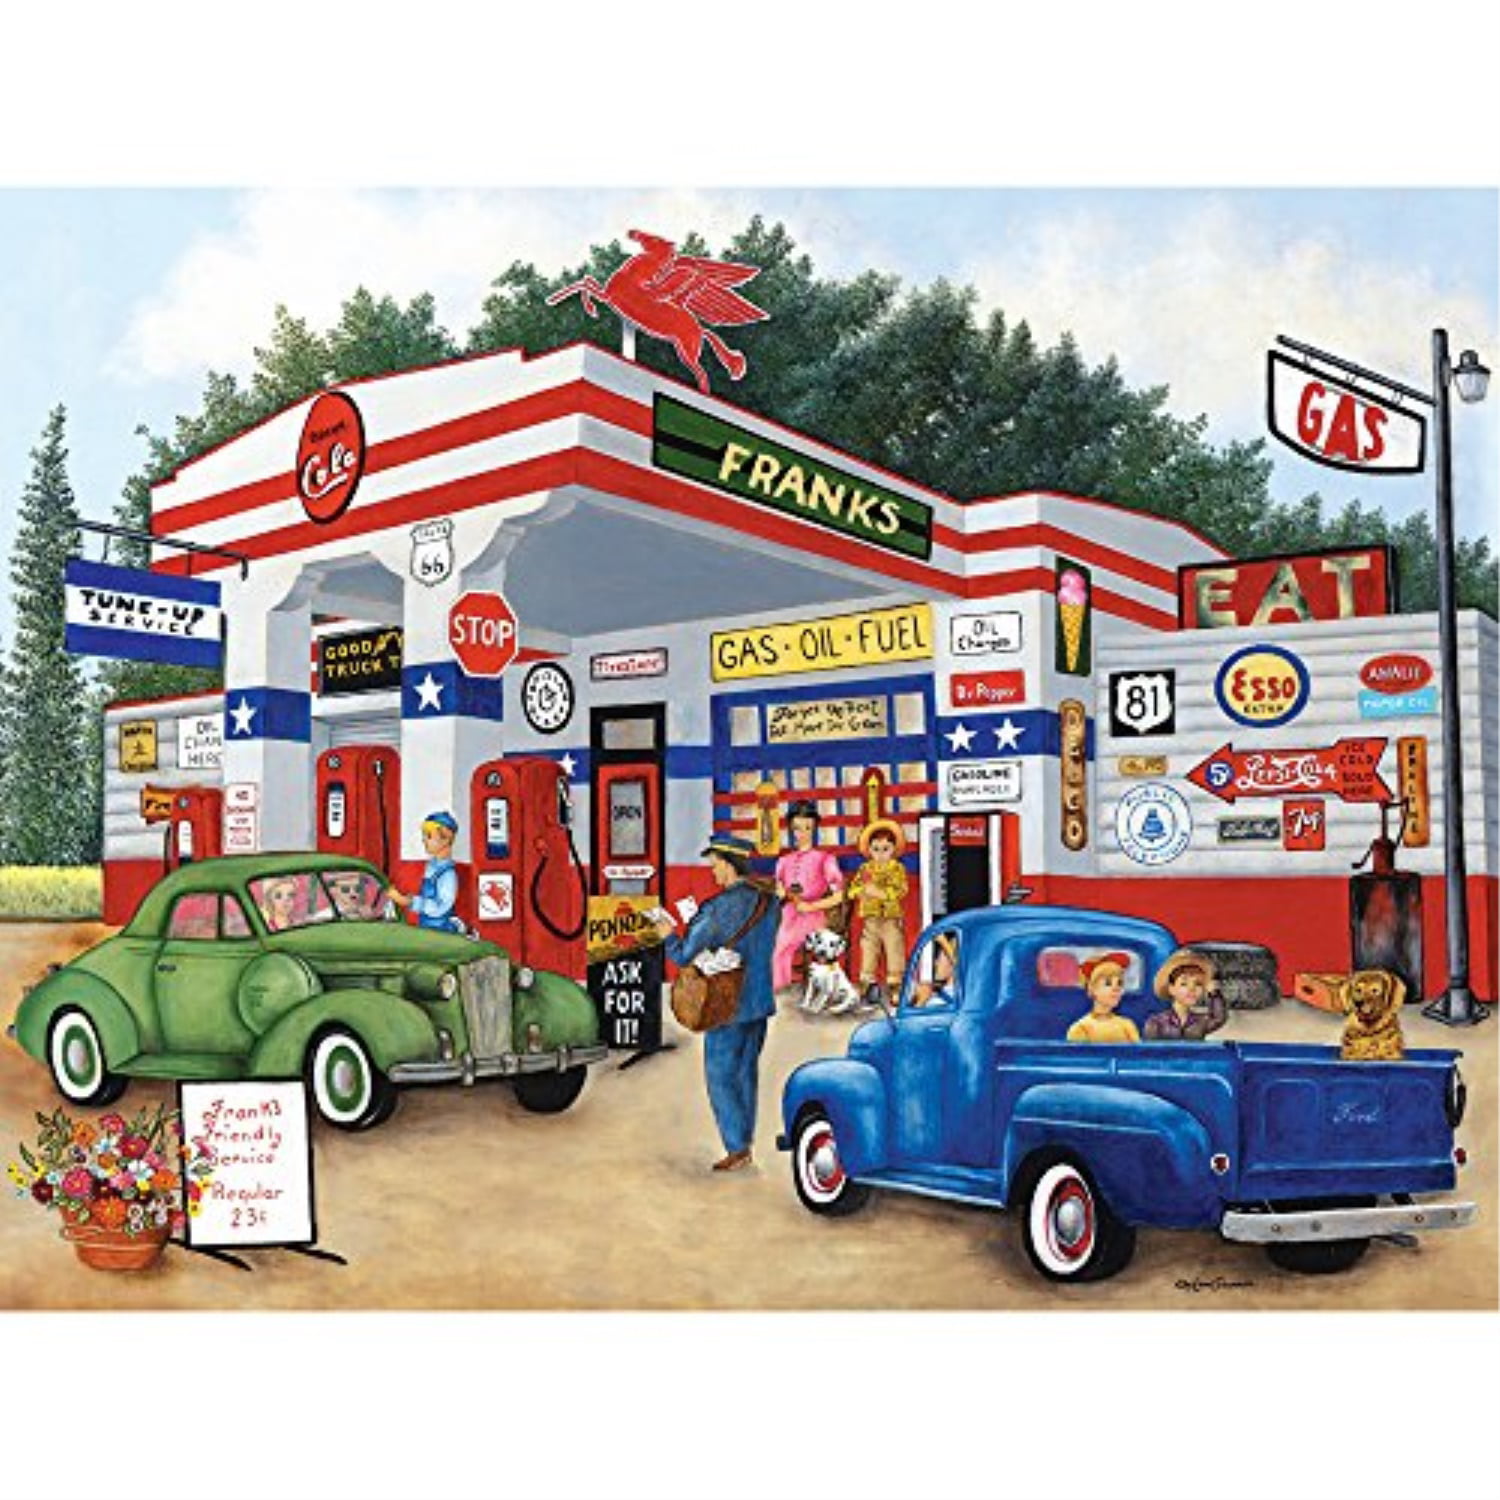 bits and pieces - 300 large piece jigsaw puzzle for adults - frank's